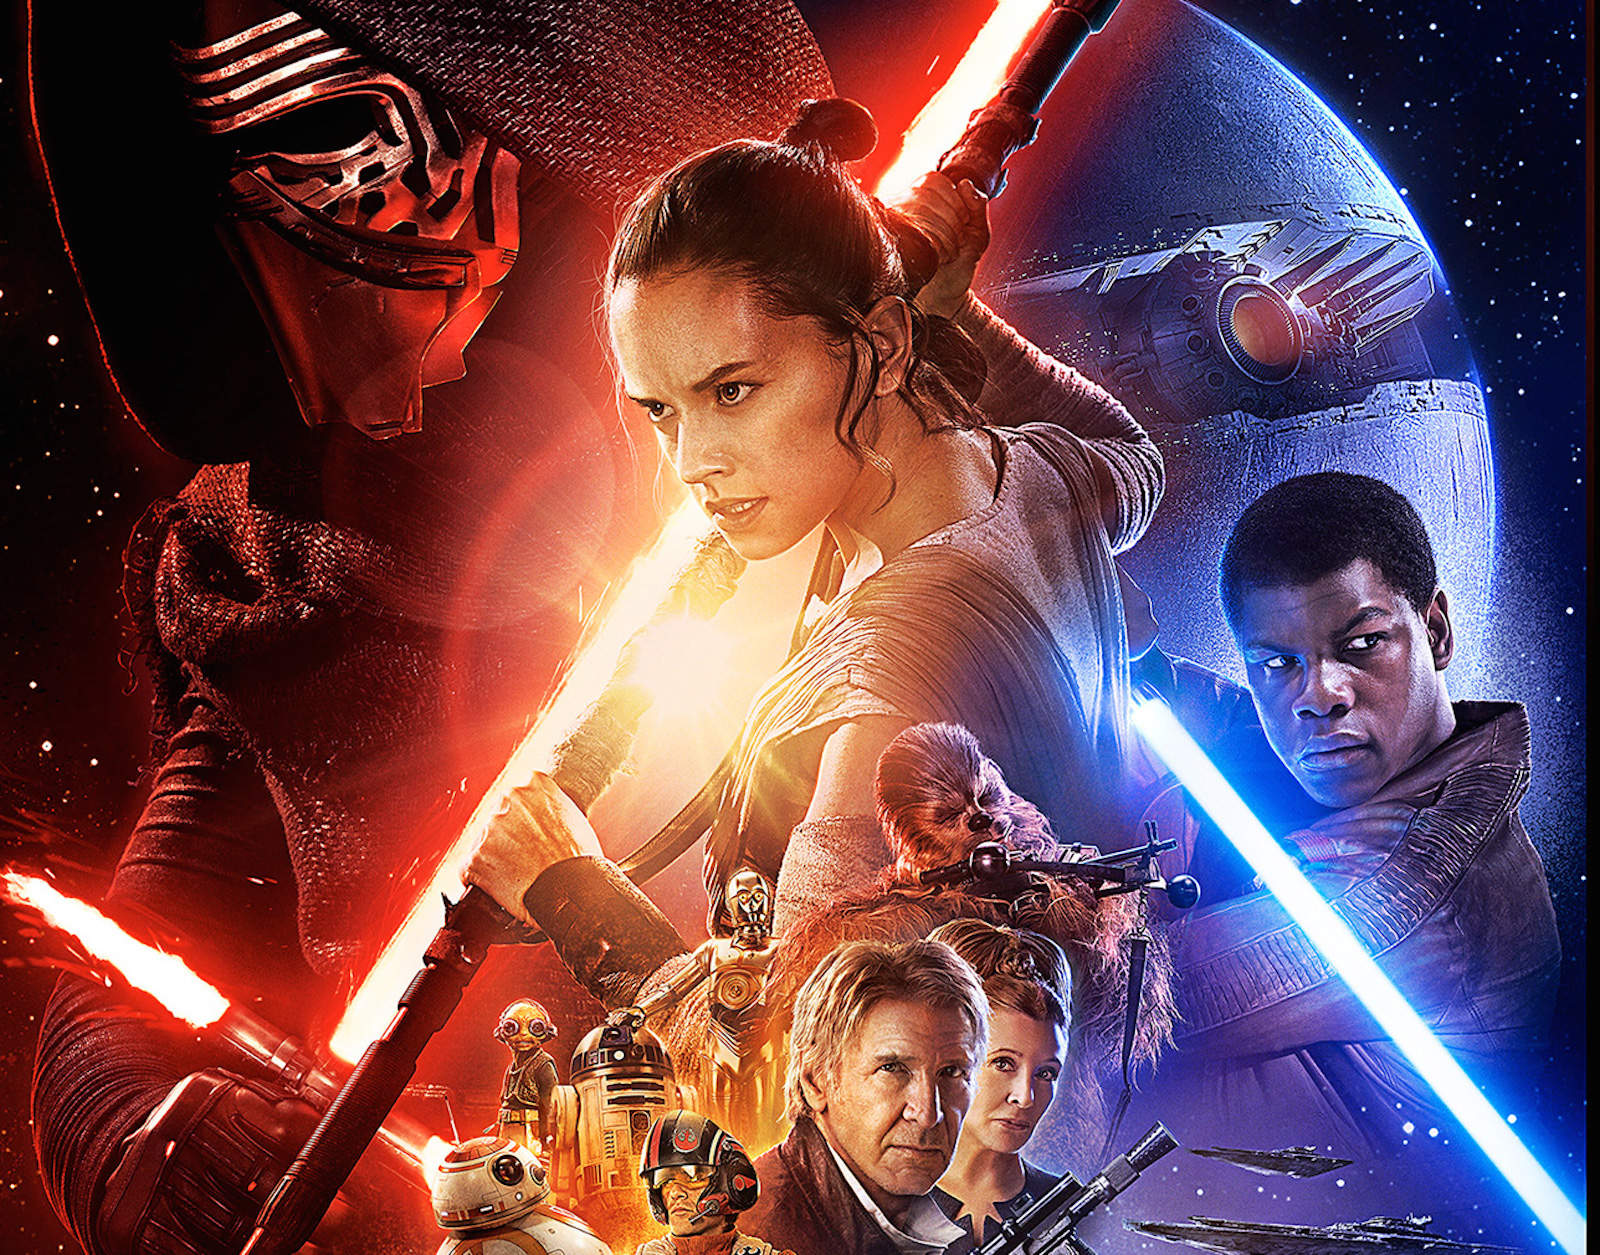 Luke Skywalker is conspicuously absent from the new Star Wars: The Force Awakens poster.